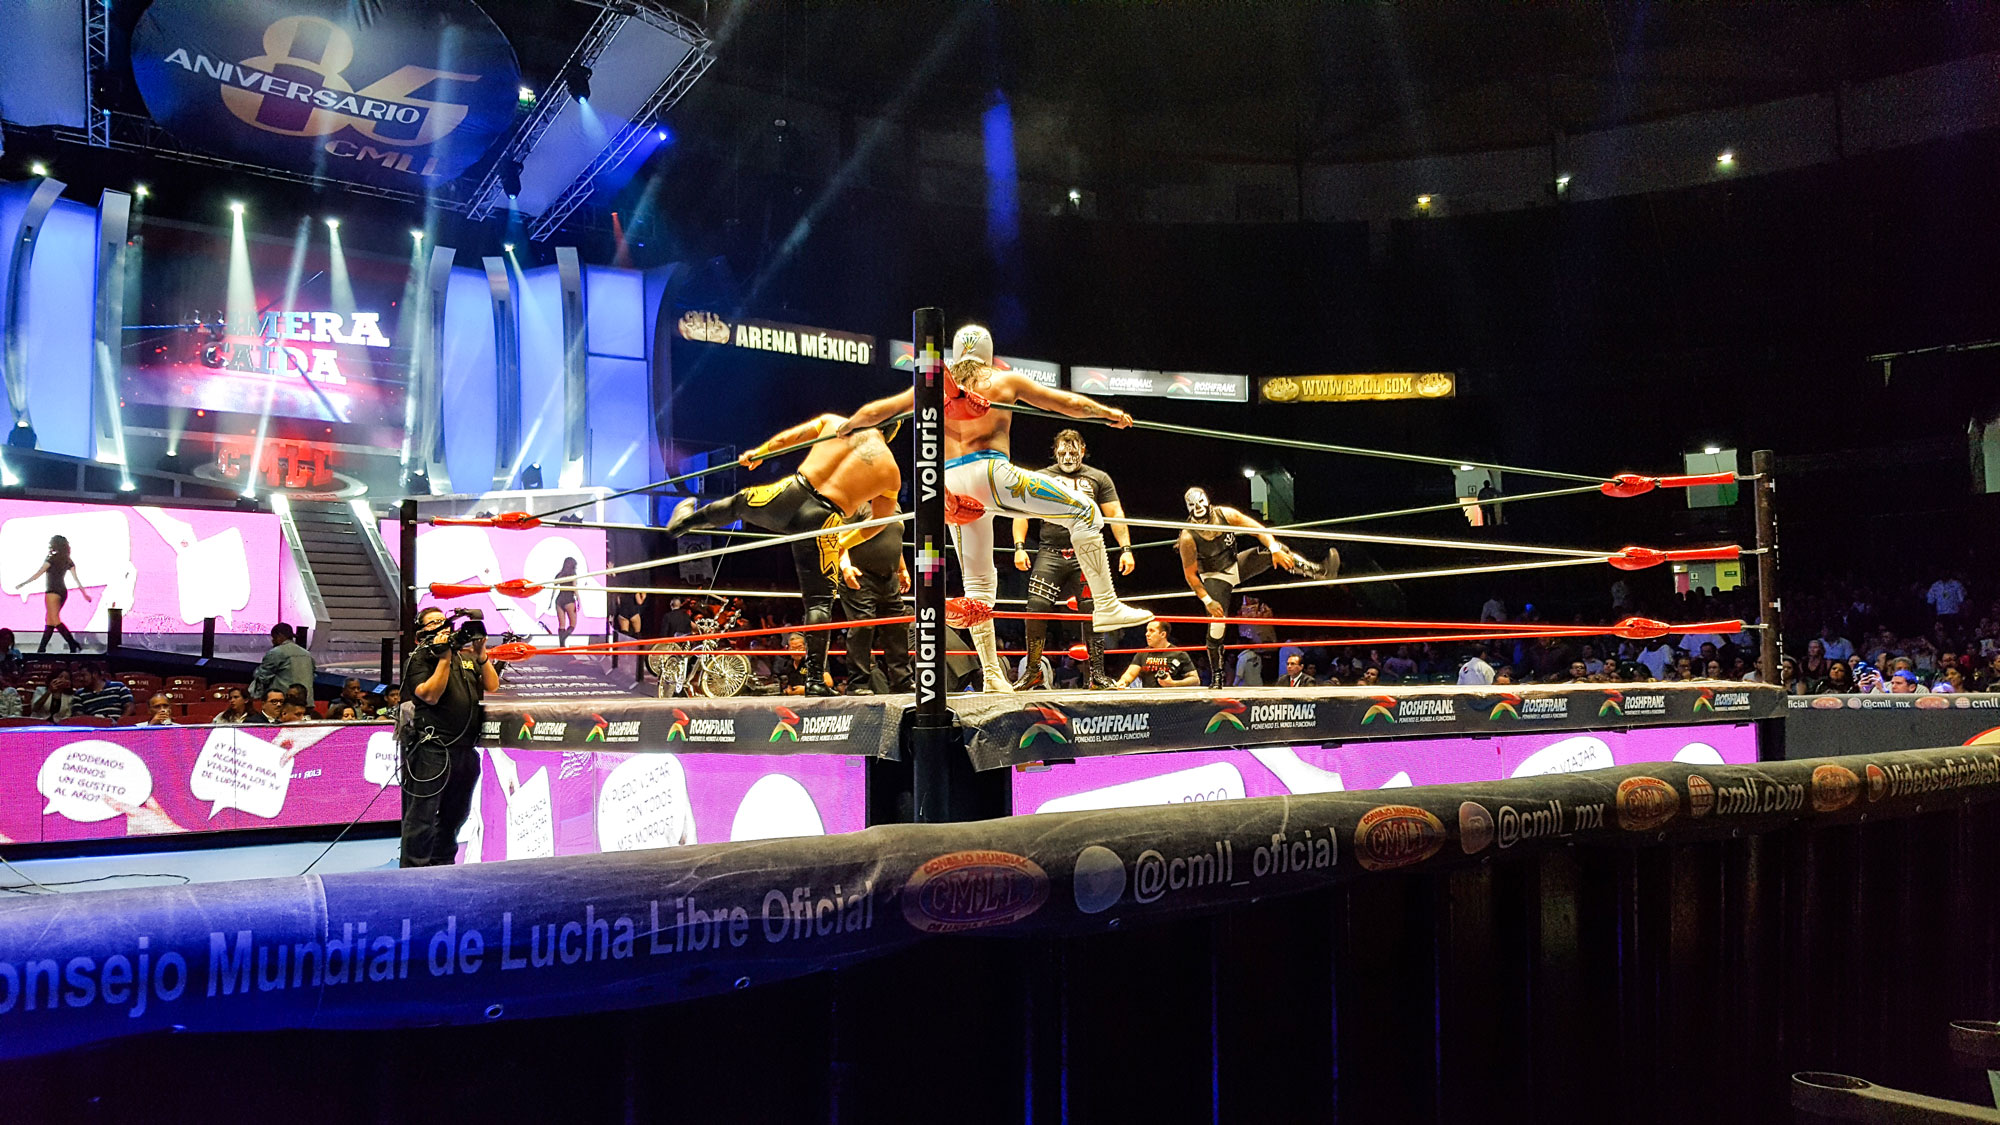 Masked wrestlers fighting in the ring